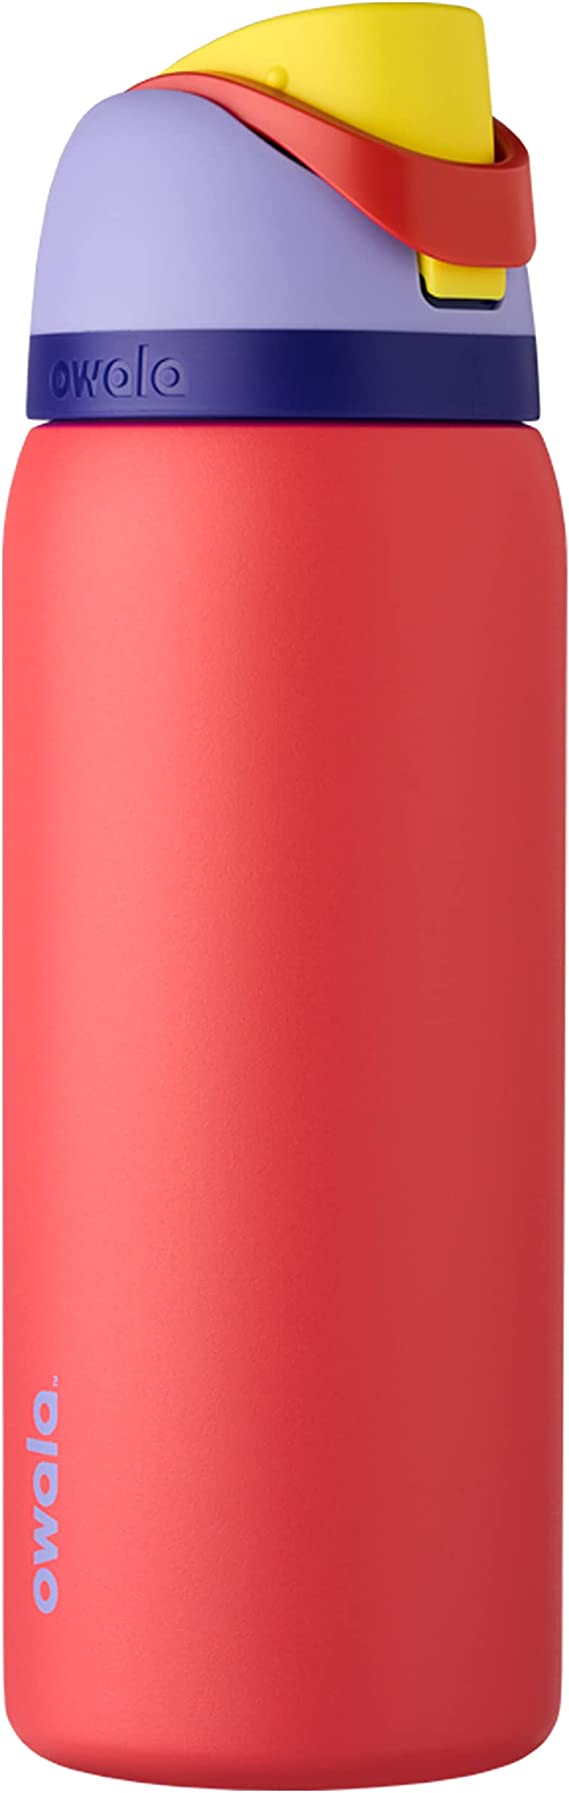 owala water bottle in red, one of the best valentine's day gifts for adventurous couples